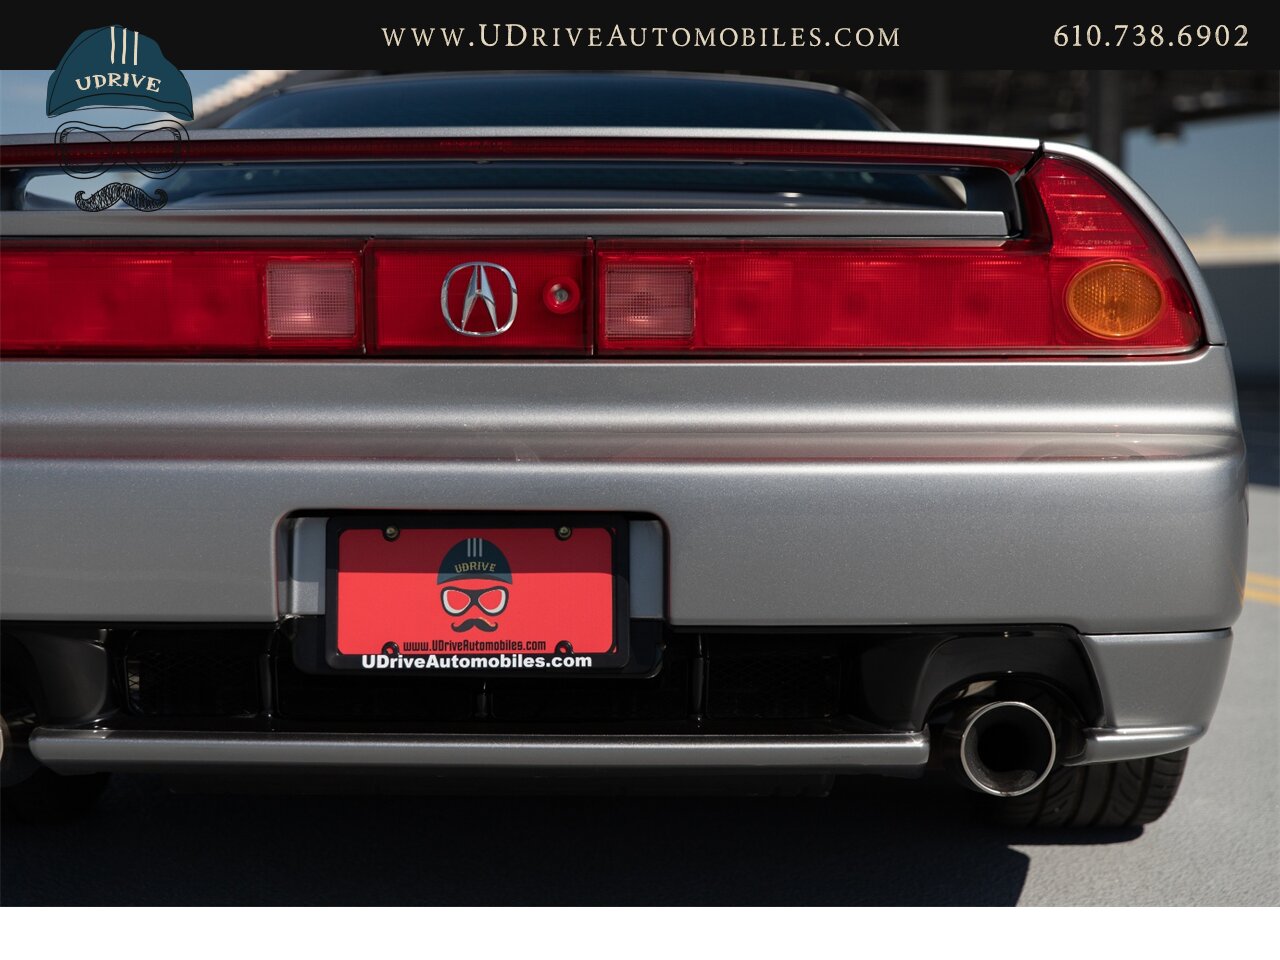 2002 Acura NSX NSX-T 9k Miles 6 Speed Manual Service History  Collector Grade - Photo 20 - West Chester, PA 19382